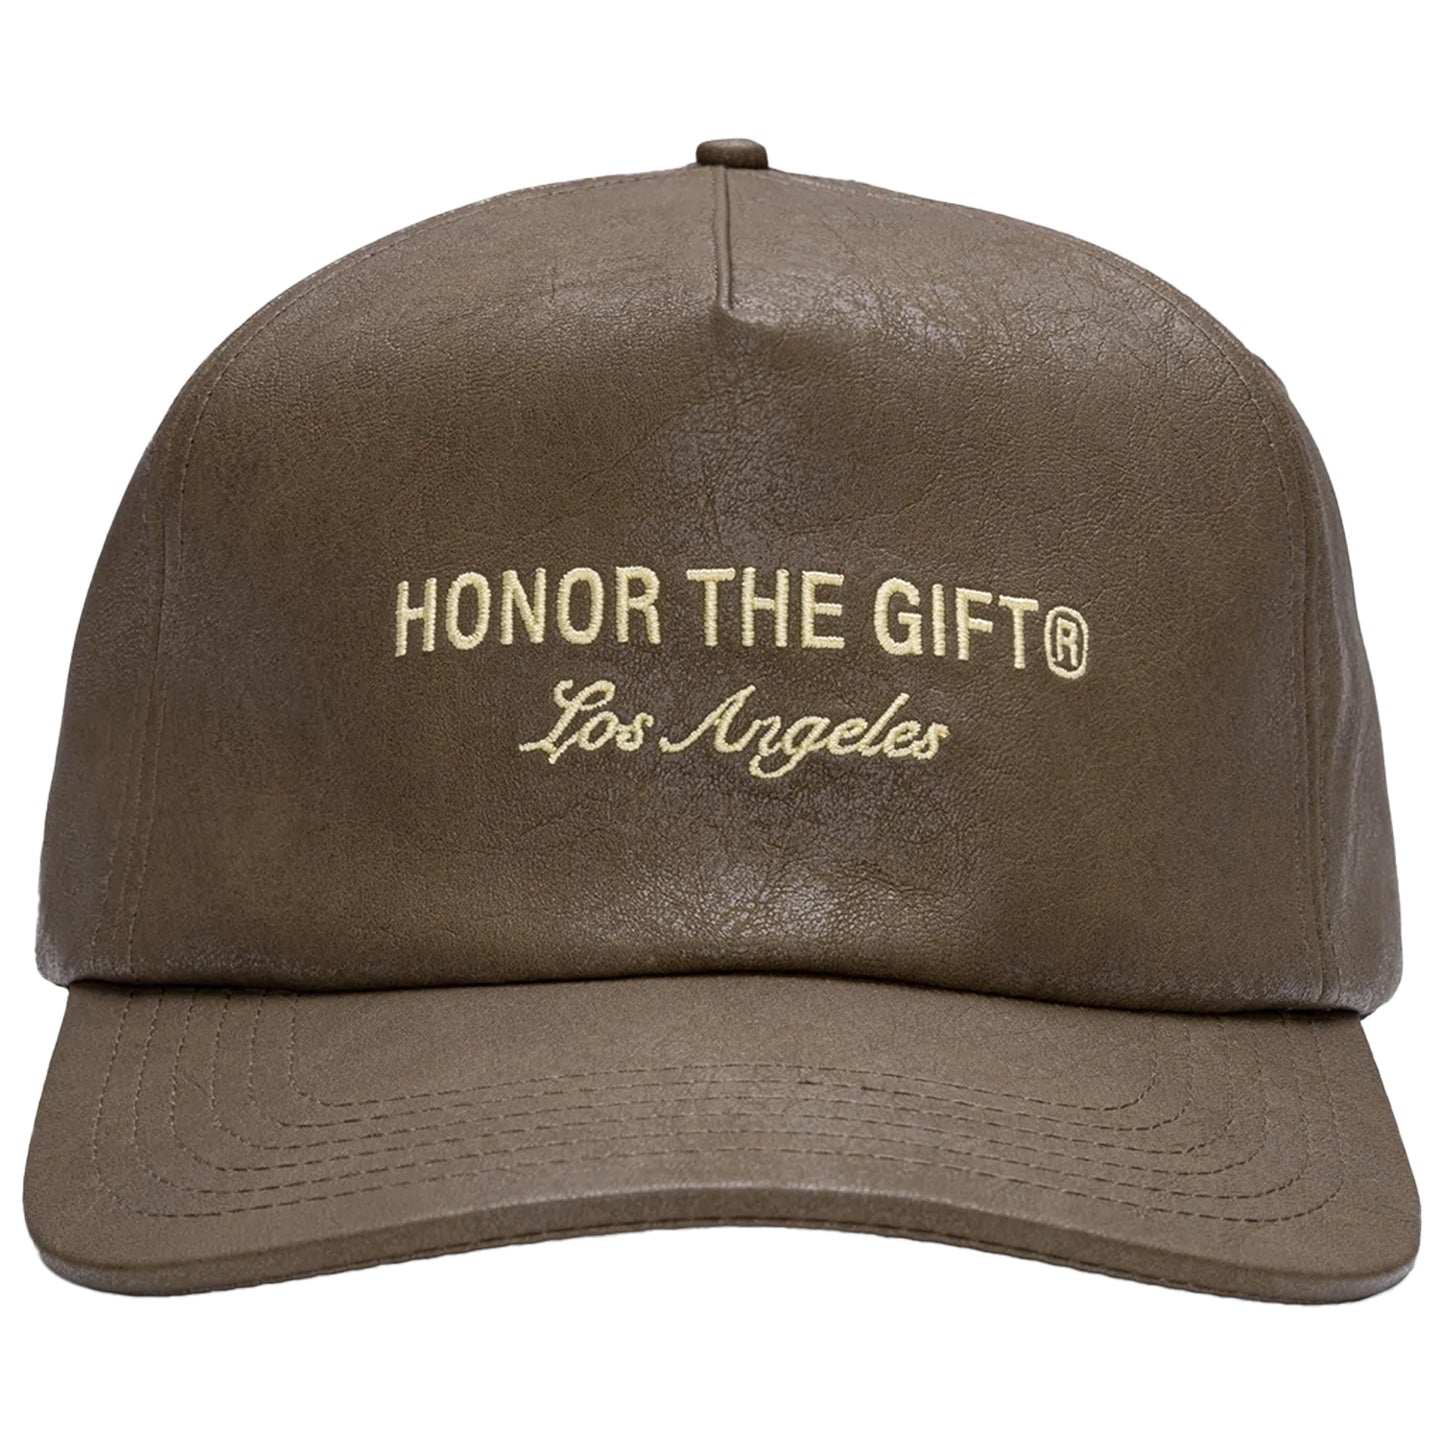 HONOR THE GIFT LOS ANGELES - HAT